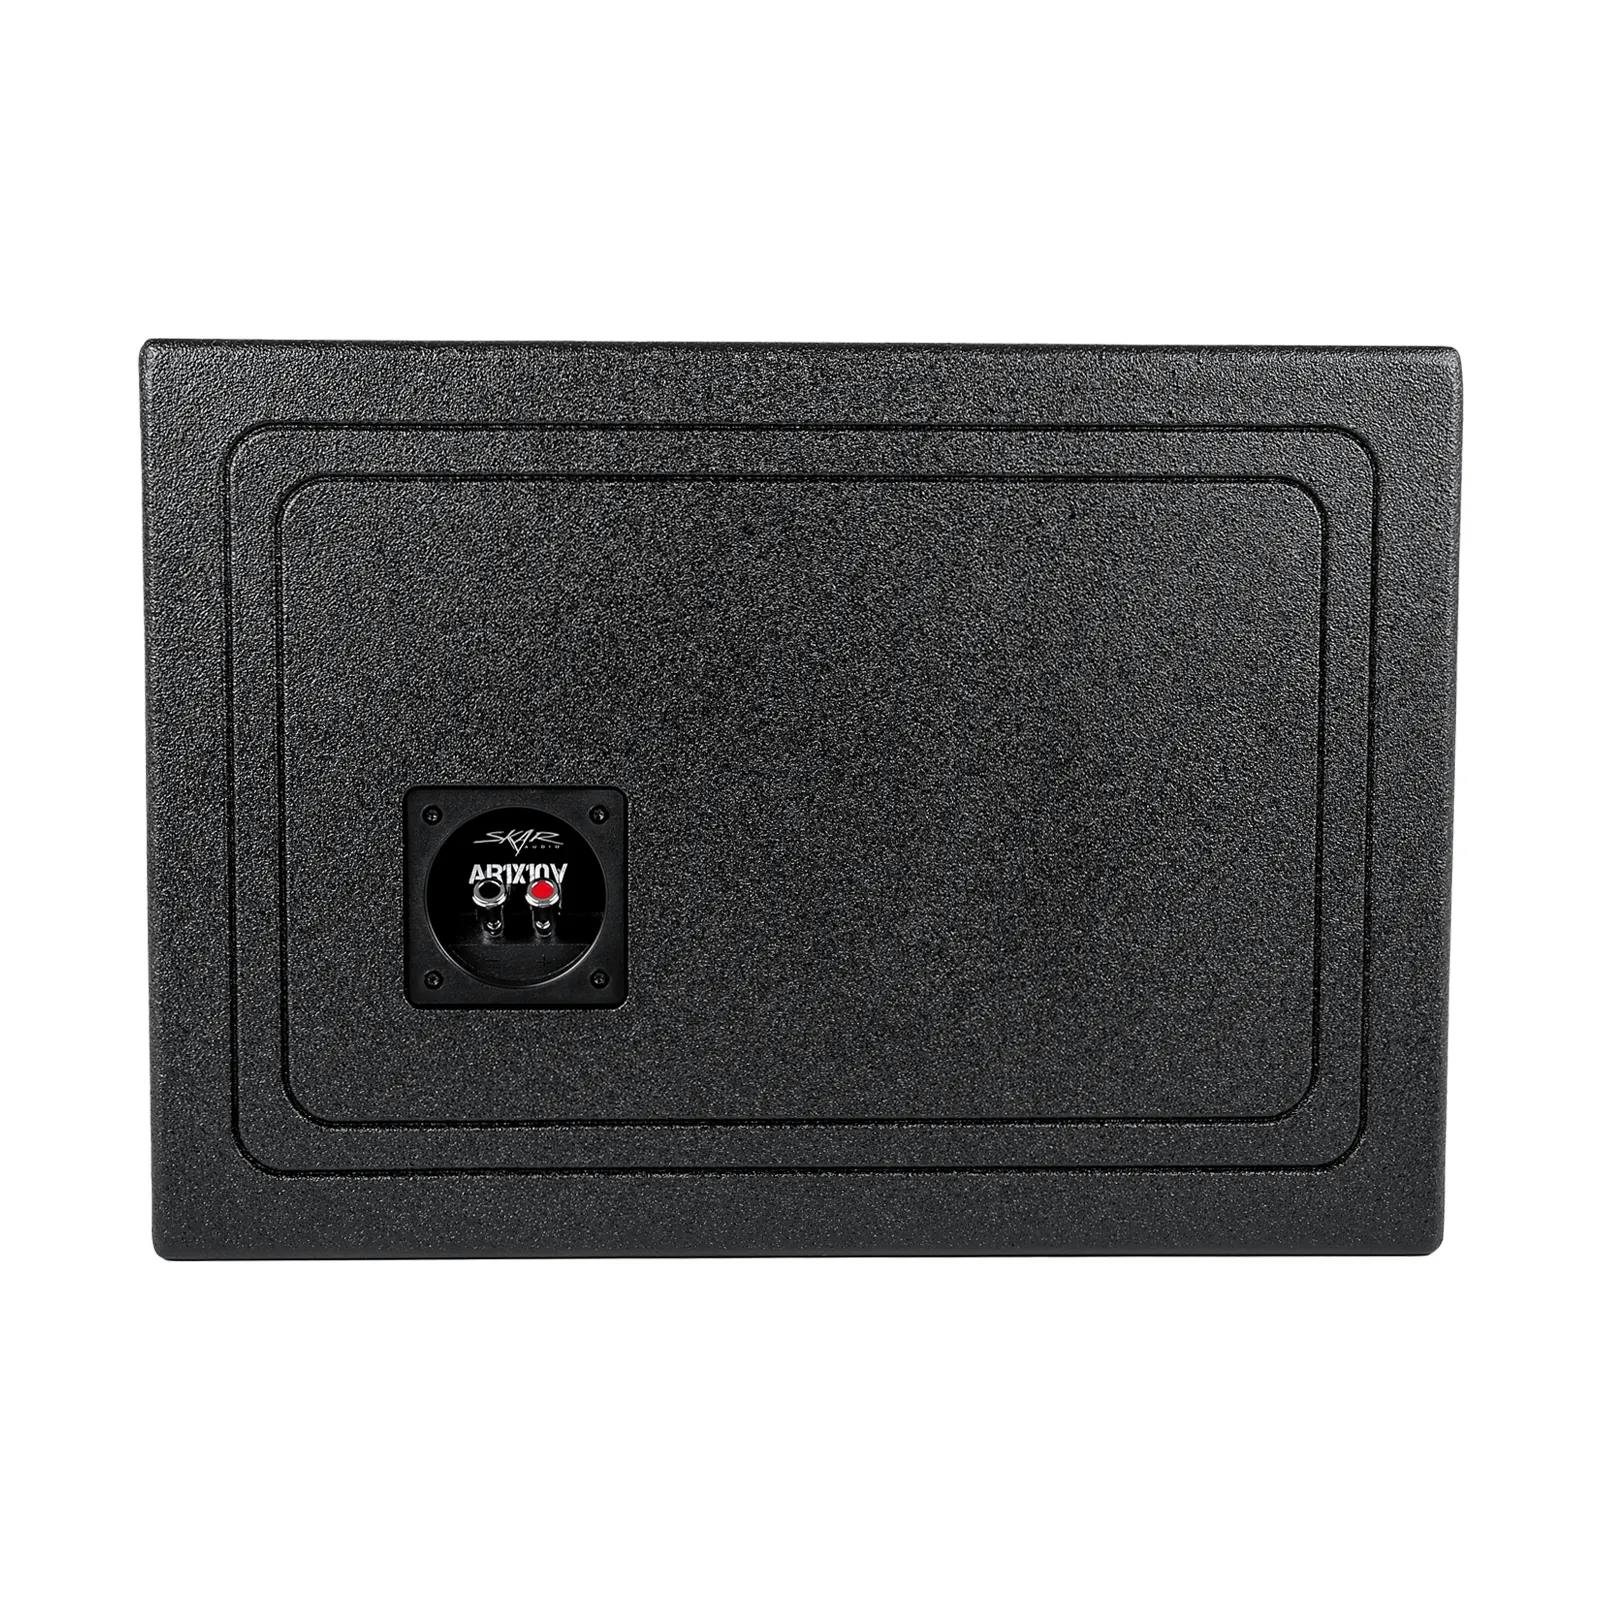 Featured Product Photo 5 for AR1X10V | Single 10" Armor Coated Ported Subwoofer Enclosure